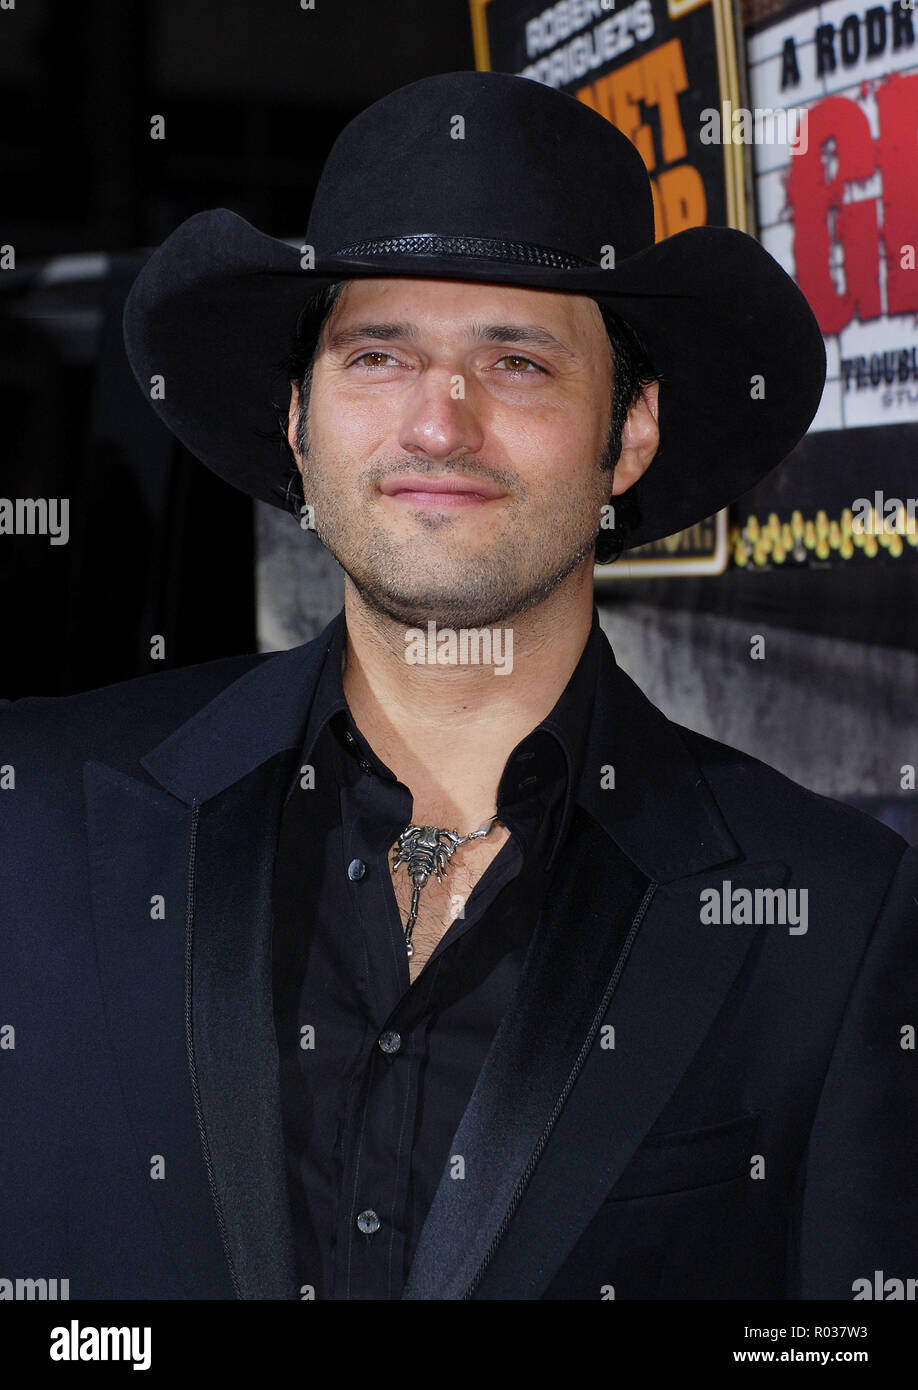 Robert Rodriguez arriving at the Grindhouse Premiere at the Orpheum Theatre In Los Angeles.  headshot hat  15 RodriguezRobert058 Red Carpet Event, Vertical, USA, Film Industry, Celebrities,  Photography, Bestof, Arts Culture and Entertainment, Topix Celebrities fashion /  Vertical, Best of, Event in Hollywood Life - California,  Red Carpet and backstage, USA, Film Industry, Celebrities,  movie celebrities, TV celebrities, Music celebrities, Photography, Bestof, Arts Culture and Entertainment,  Topix, headshot, vertical, one person,, from the year , 2007, inquiry tsuni@Gamma-USA.com Stock Photo